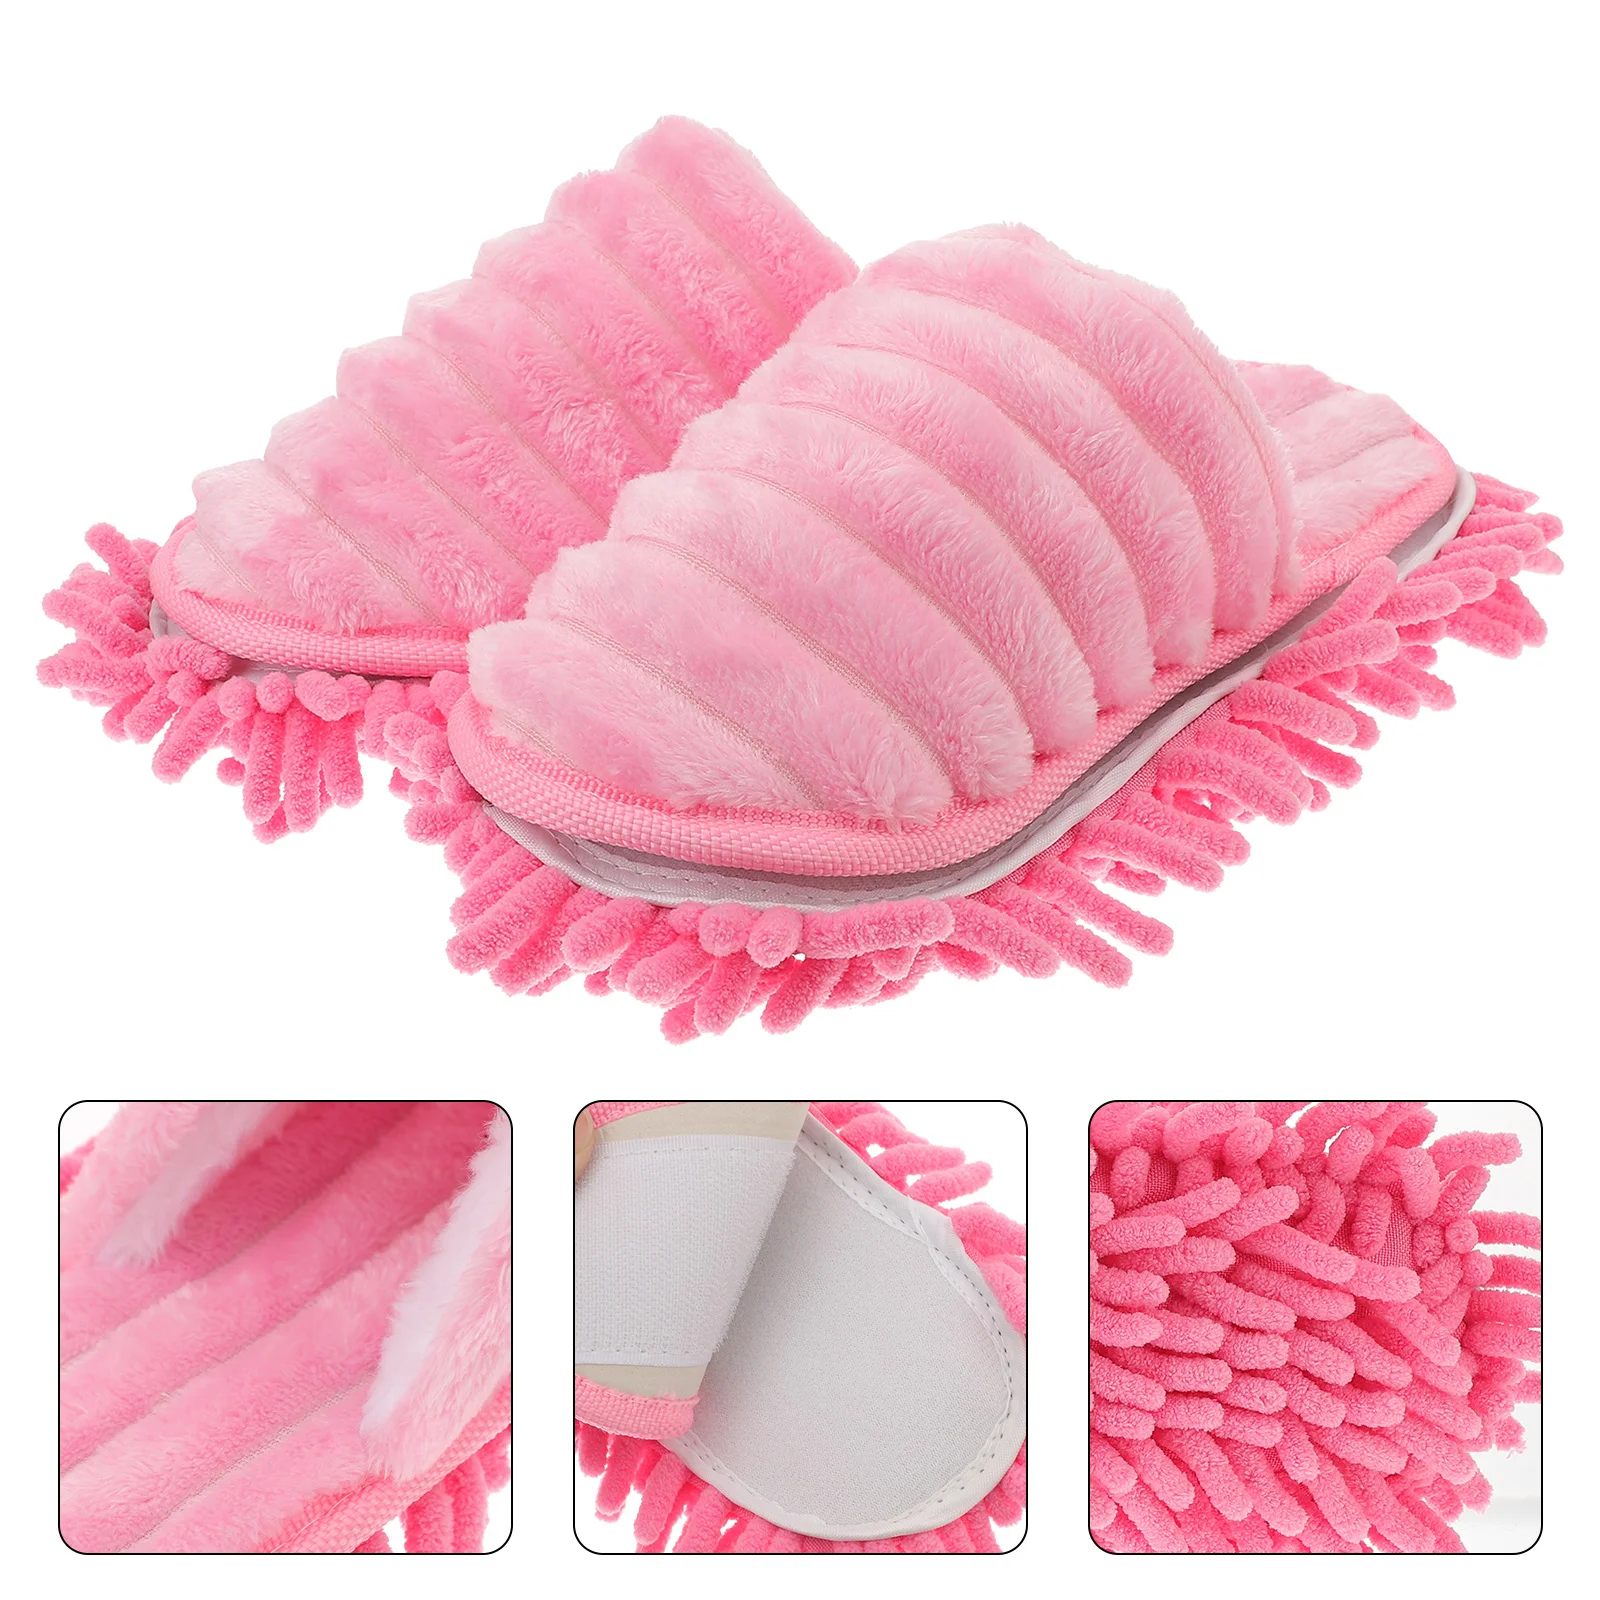 

1 Pair Furry Stripes Floor Cleaning Slippers Detachable Bottom Mopping Slipper - Size S 35-37 (Pink)